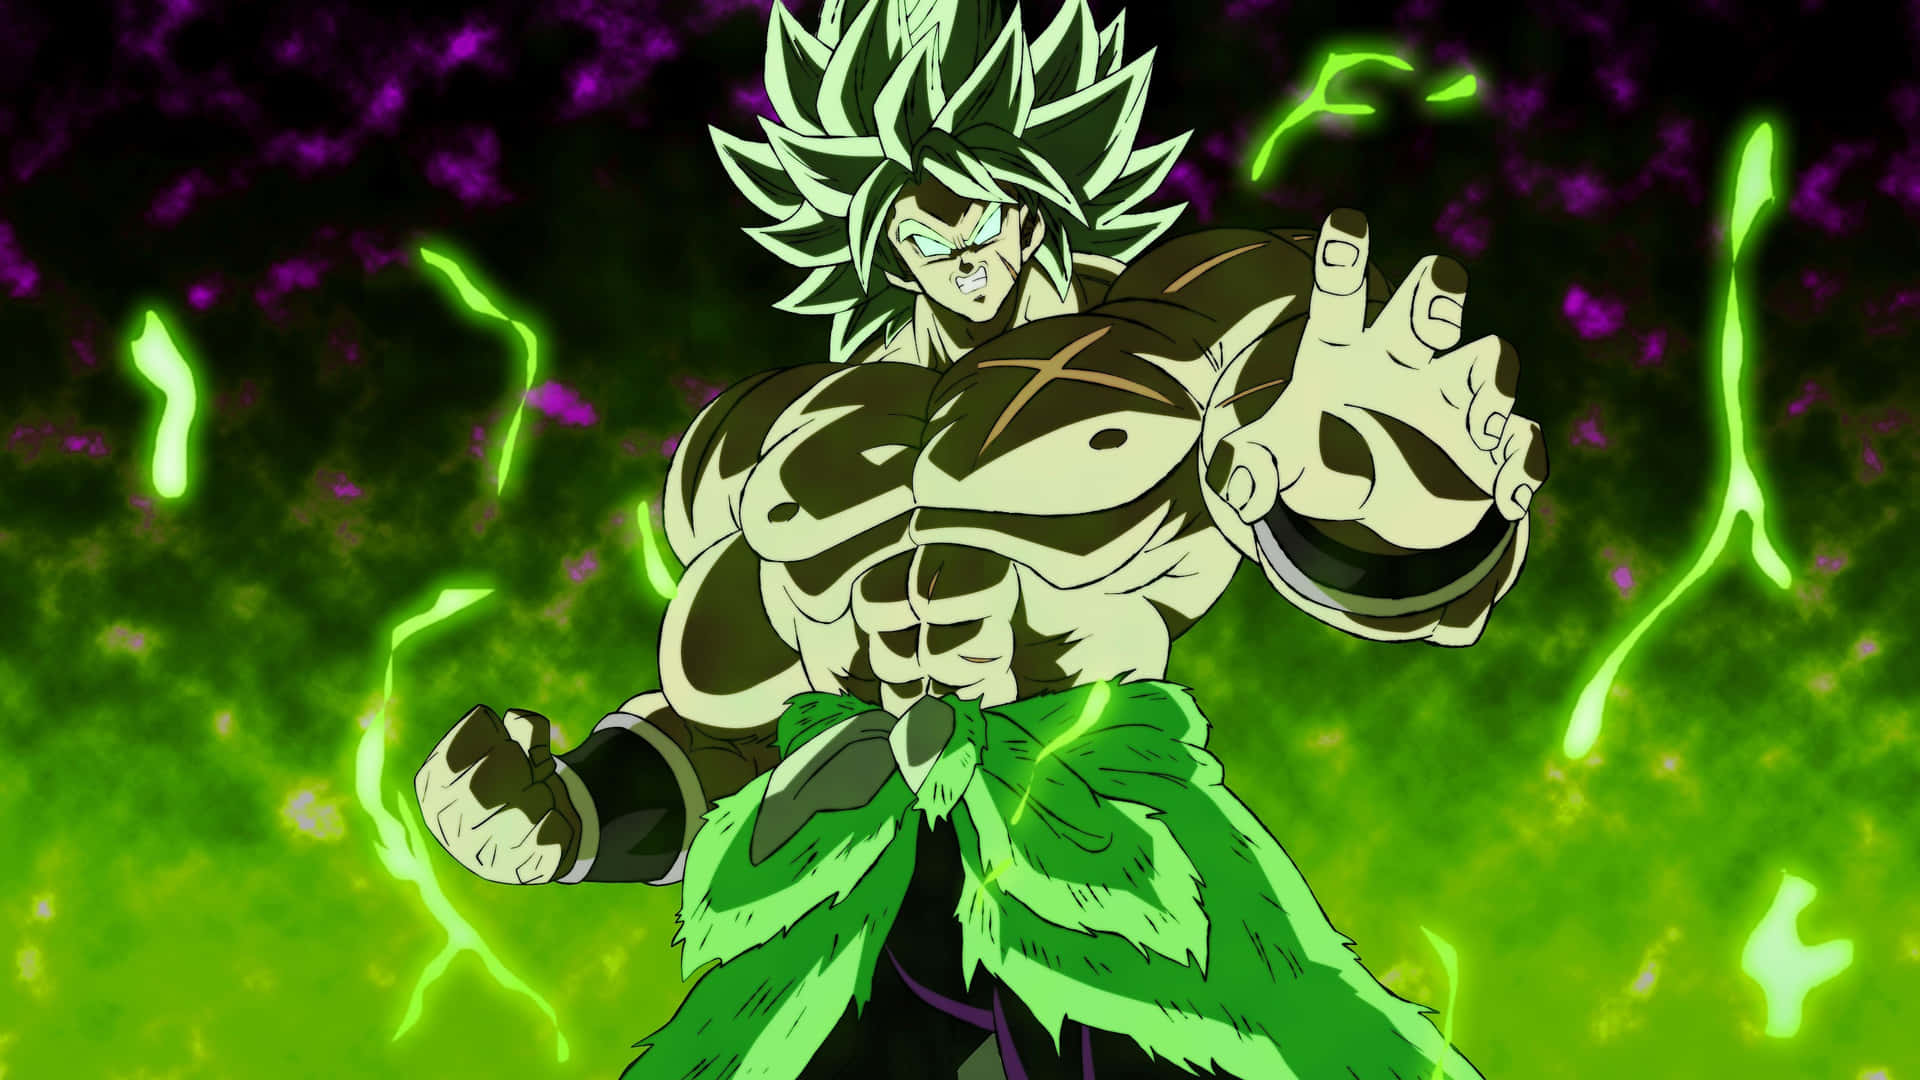 Experience the Epic Battle in "Dragon Ball Super Broly"